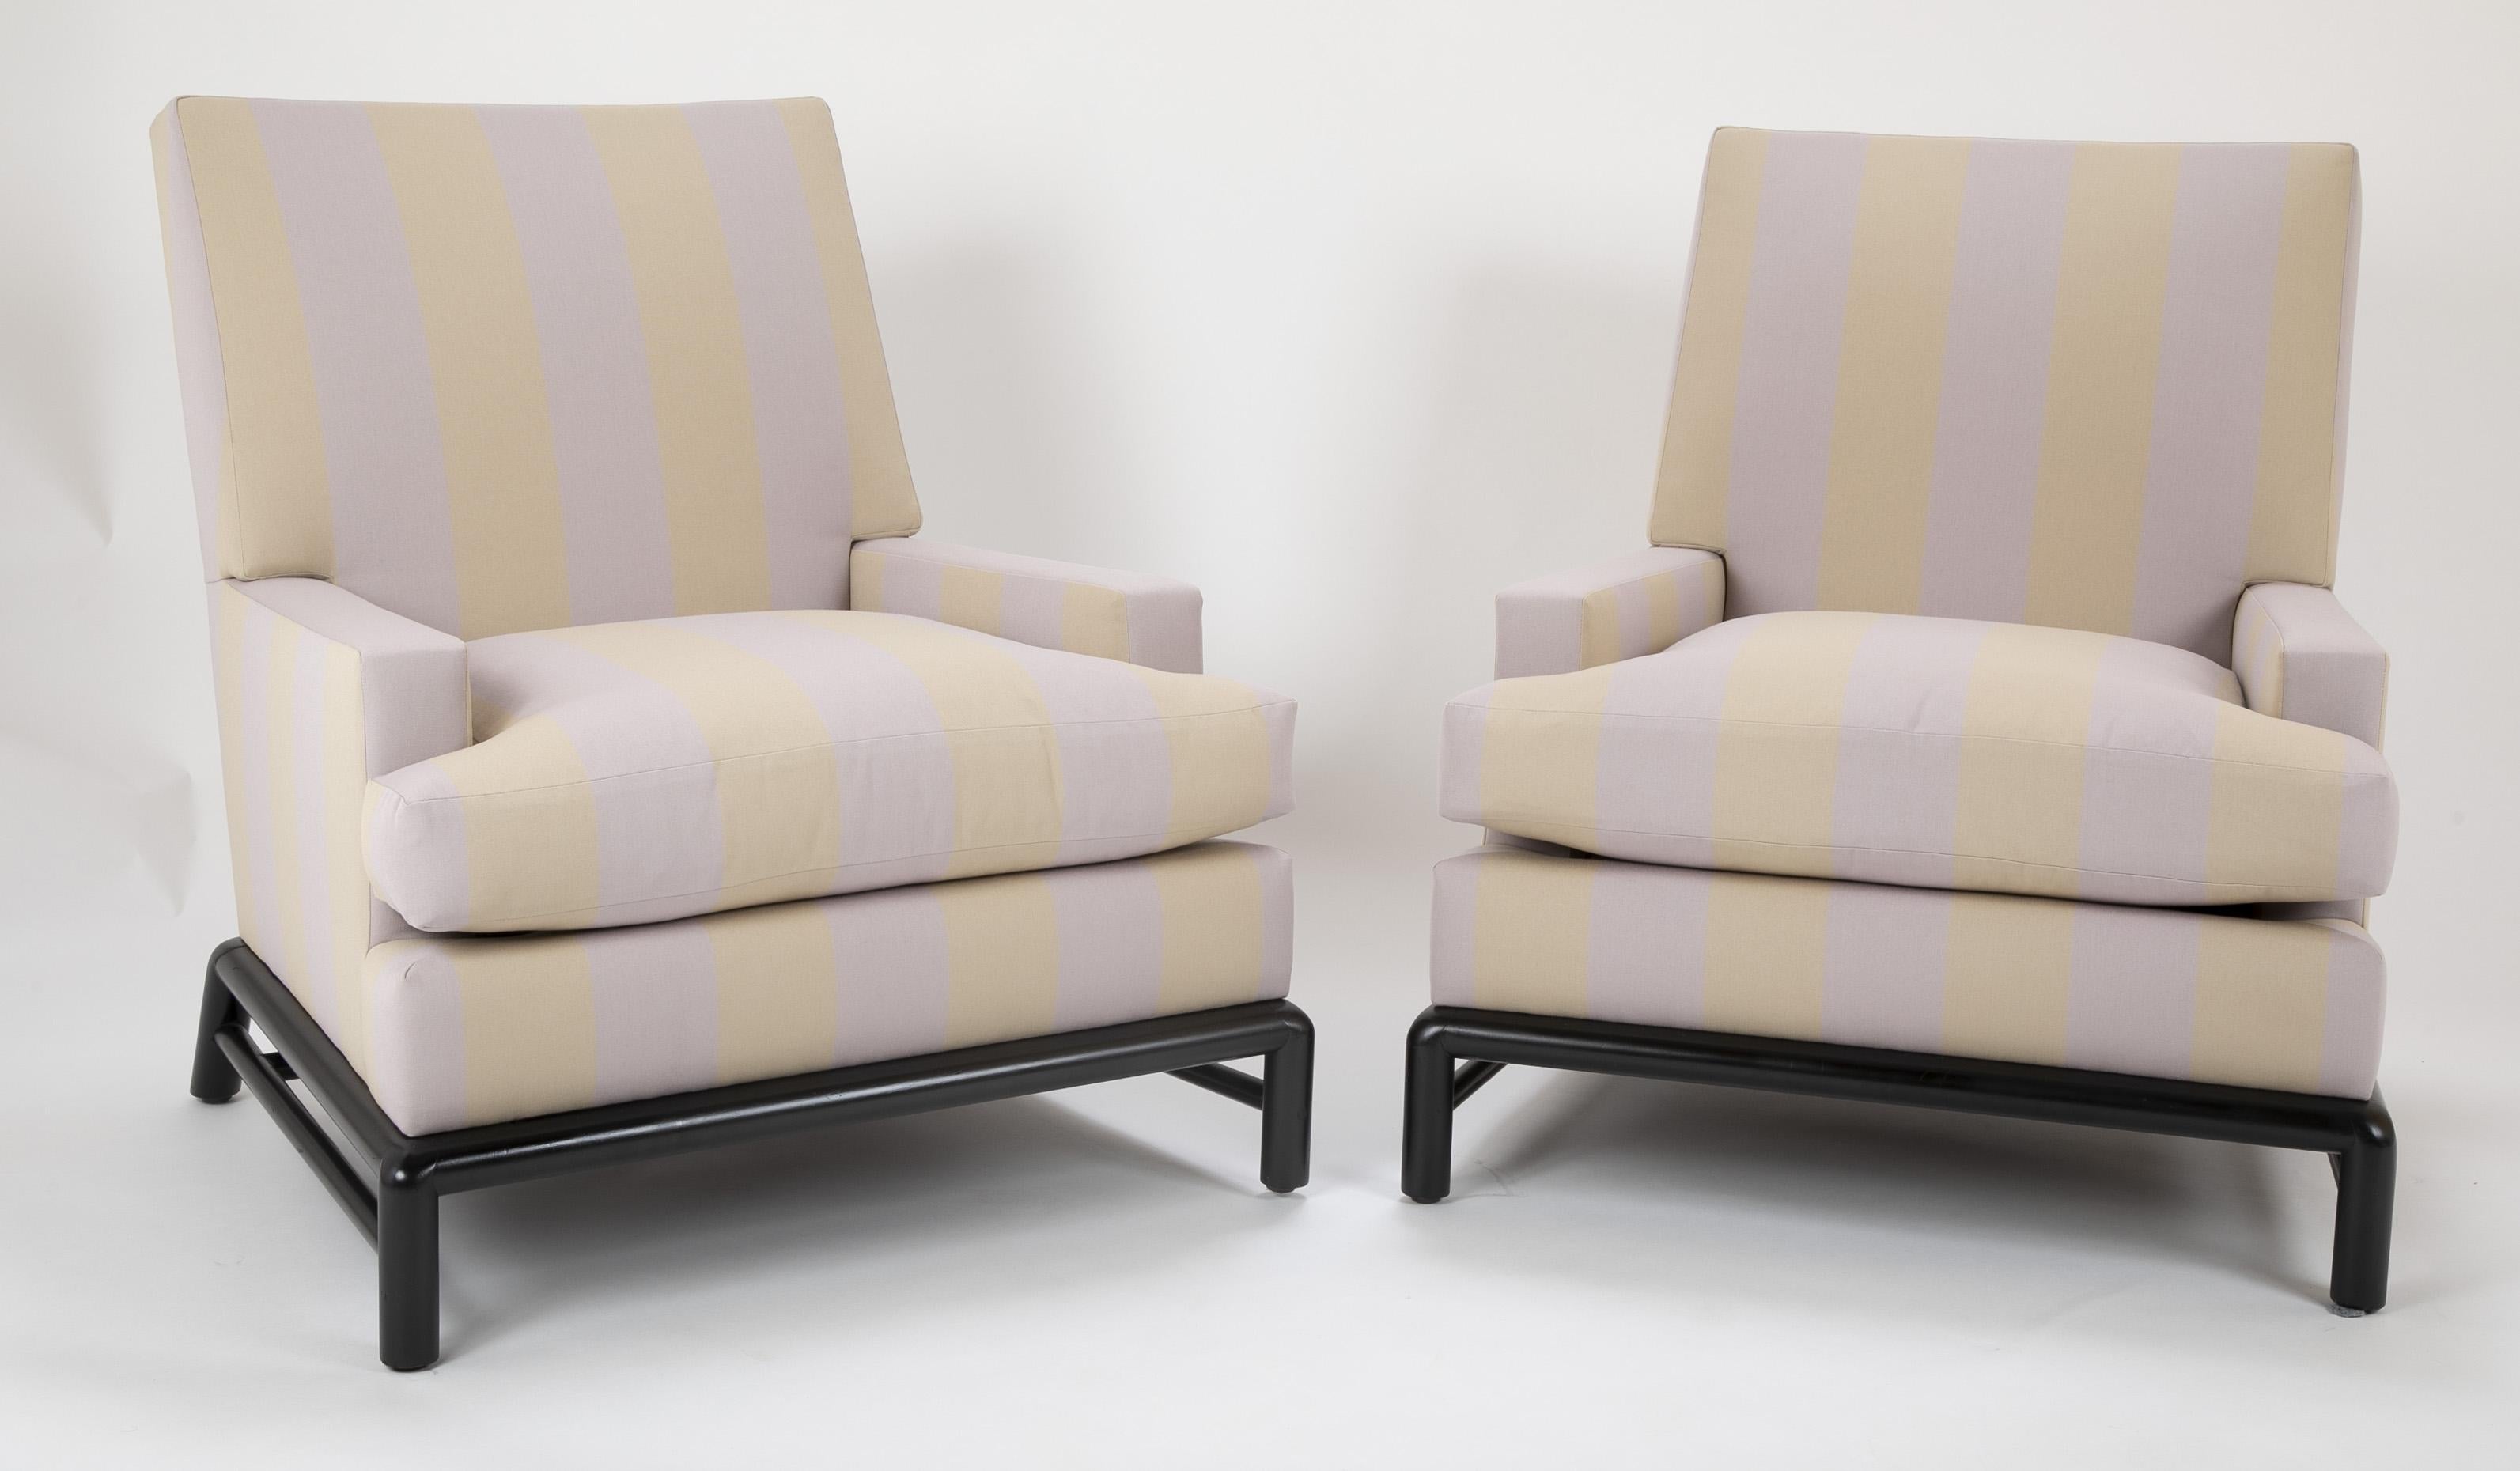 A pair chairs designed by T.H. Robsjohn Gibbings, upholstered in Rogers & Goffigon fabric. Newly upholstered with down cushion.